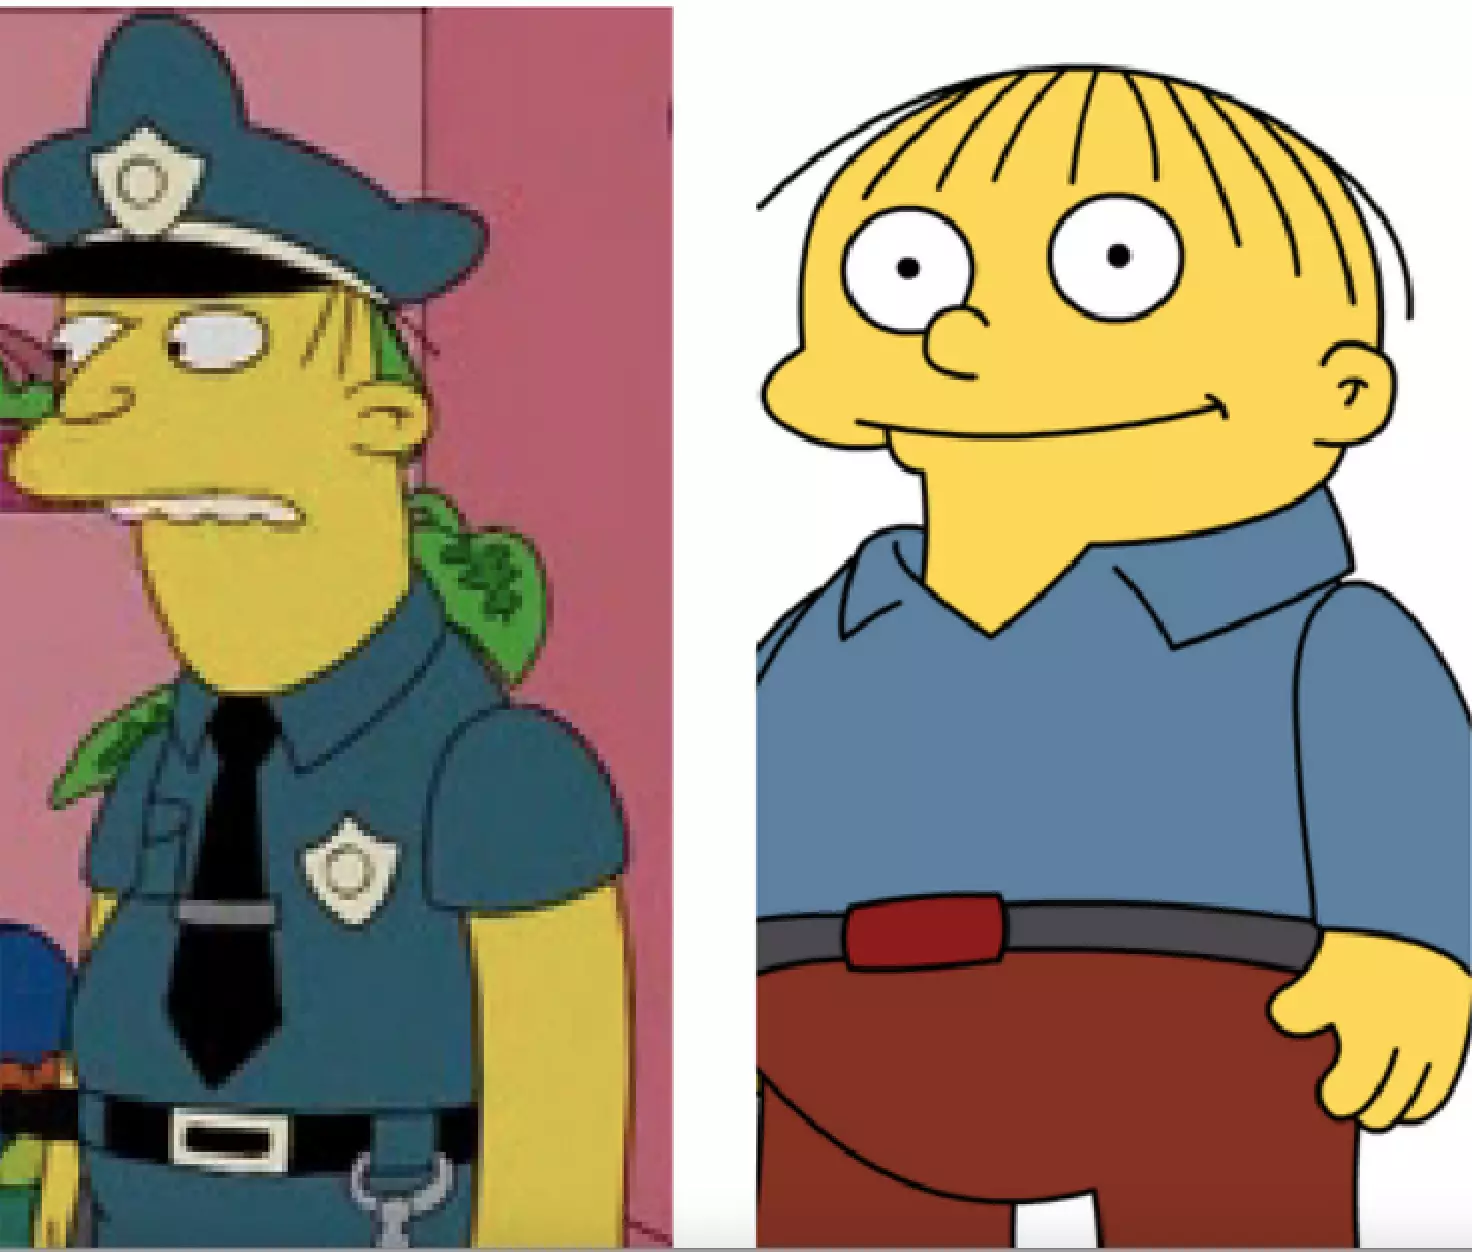 Eddie is Ralph's biological dad according to some Simpsons fans on Reddit (